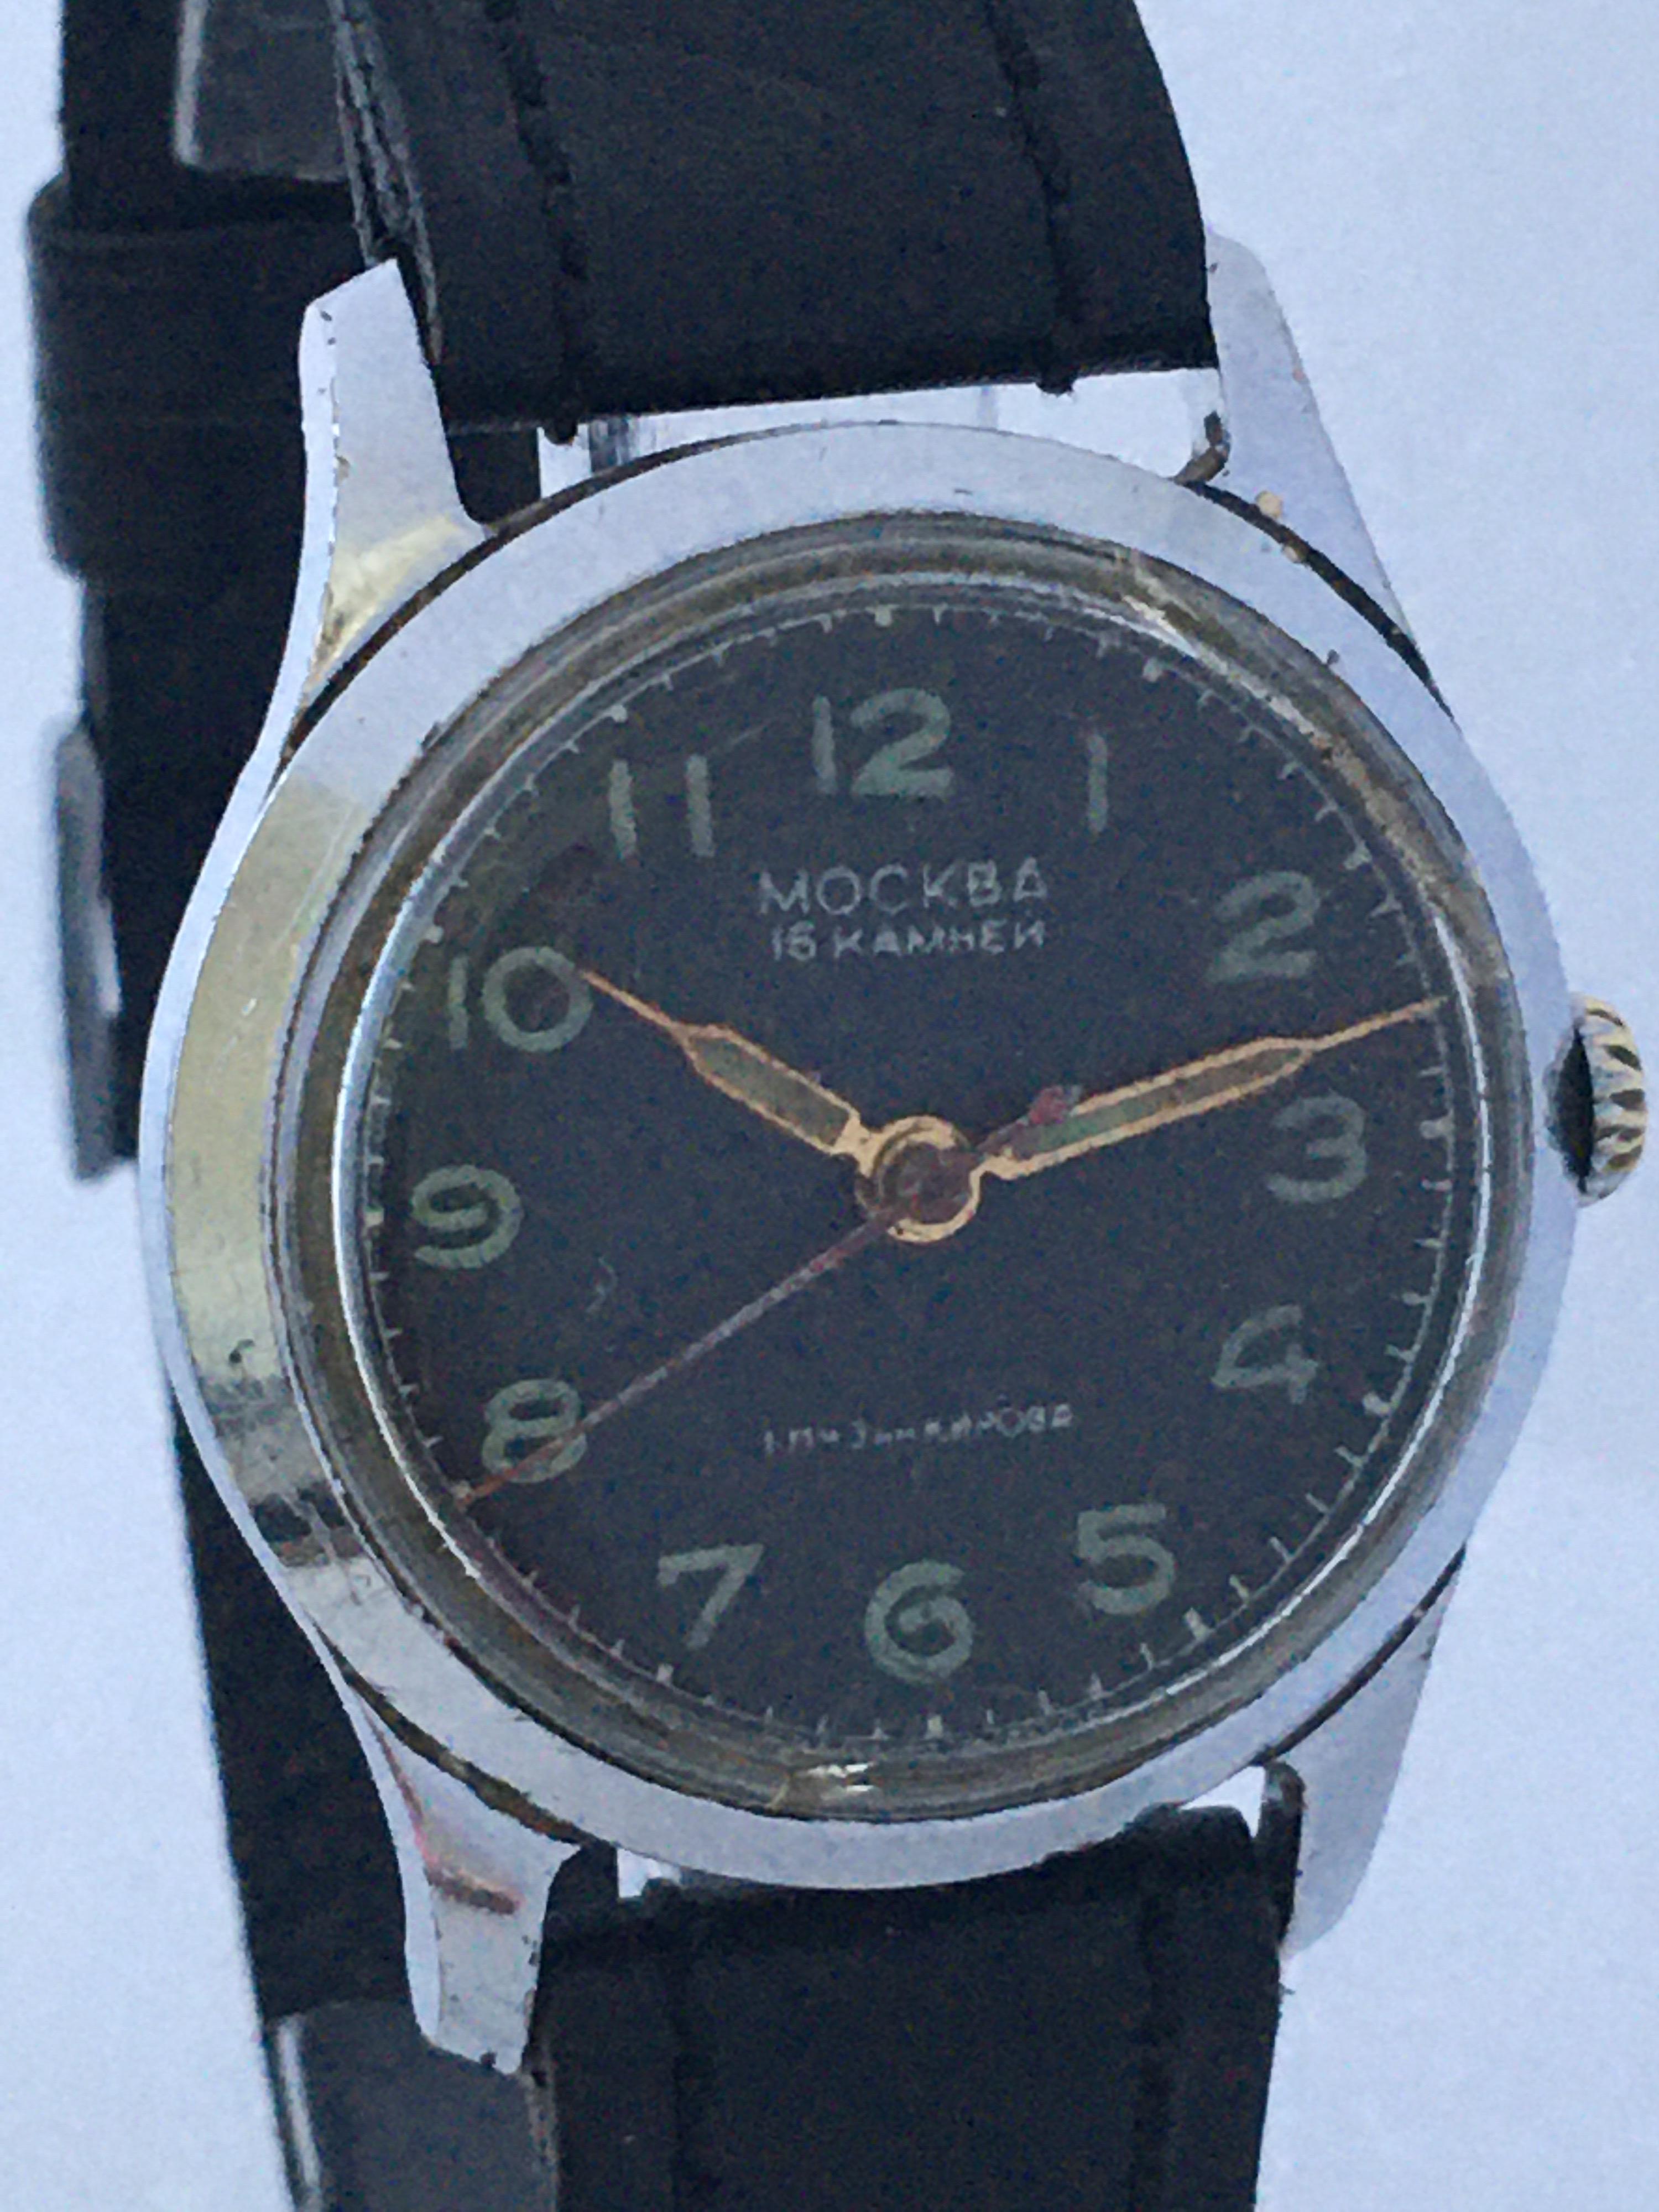 This pre-owned 30mm hand-winding watch is in good working condition. and it is running well. Visible signs of ageing and wear with cracks and light scratches on the glass as shown. some tarnishes and light scratches on the steel case as